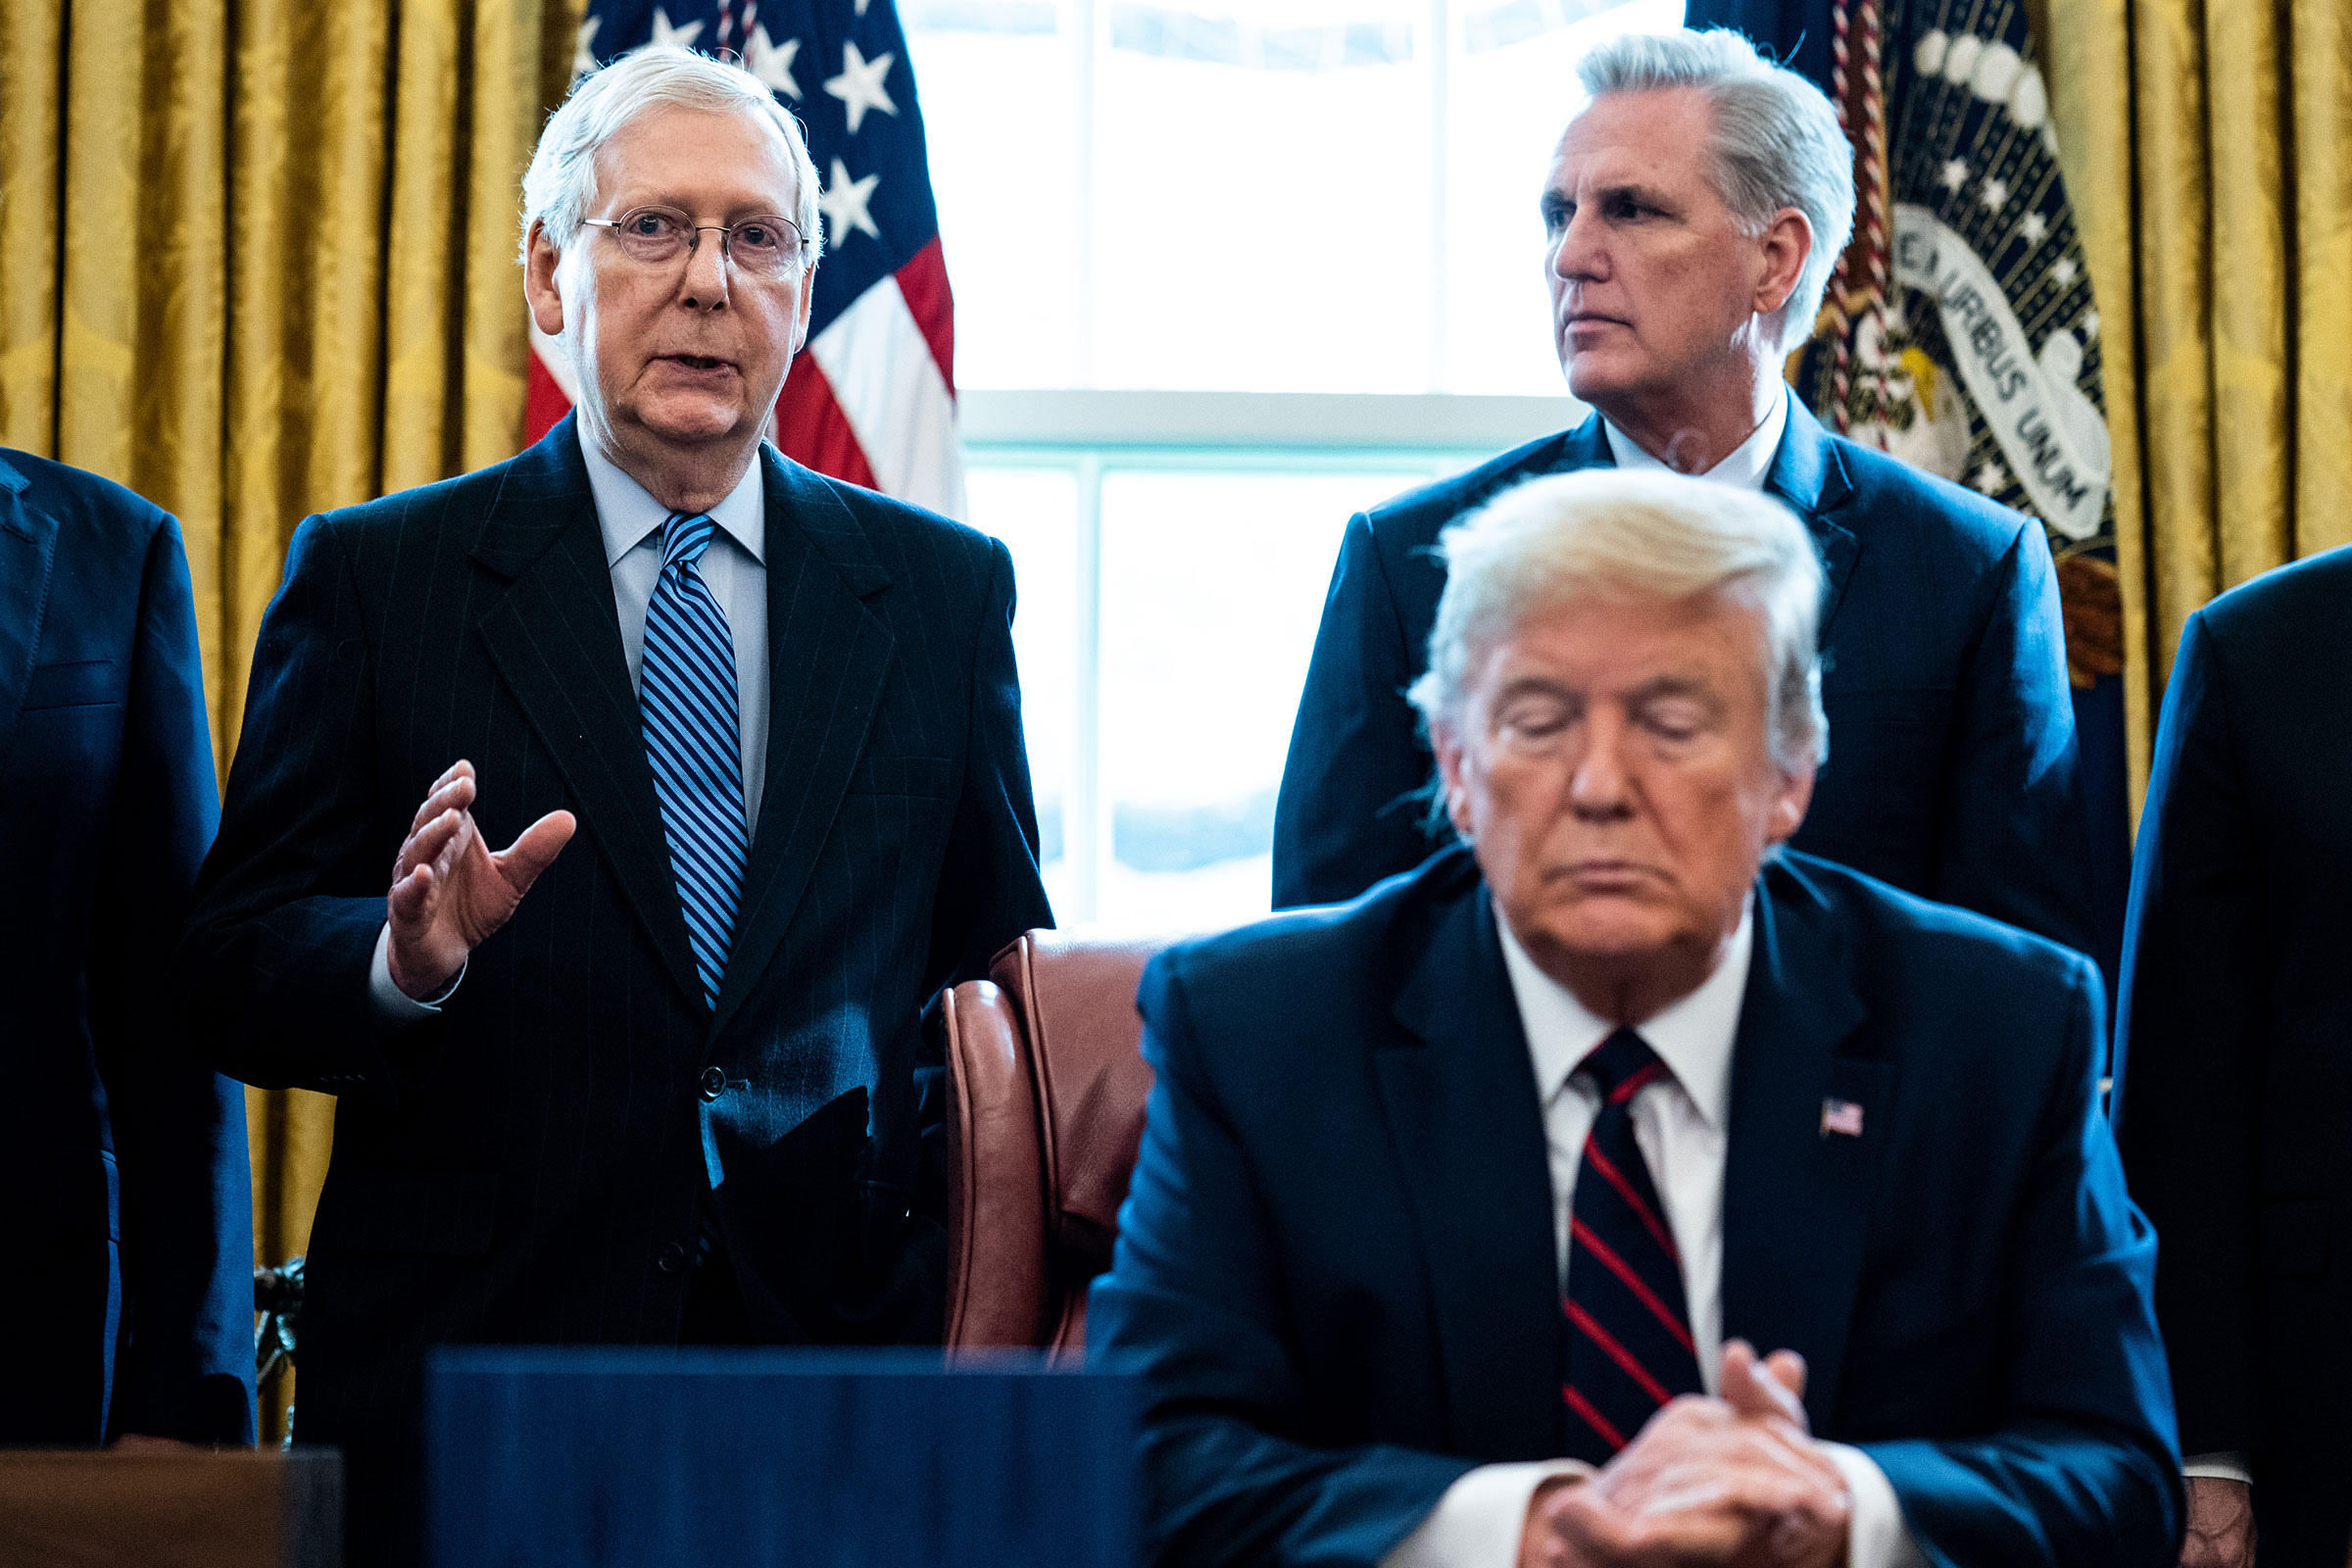 In this March 2020 photo, Sen. Mitch McConnell speaks as House Minority Leader Kevin McCarthy and President Donald Trump listen in the Oval Office of the White House in Washington, DC. 